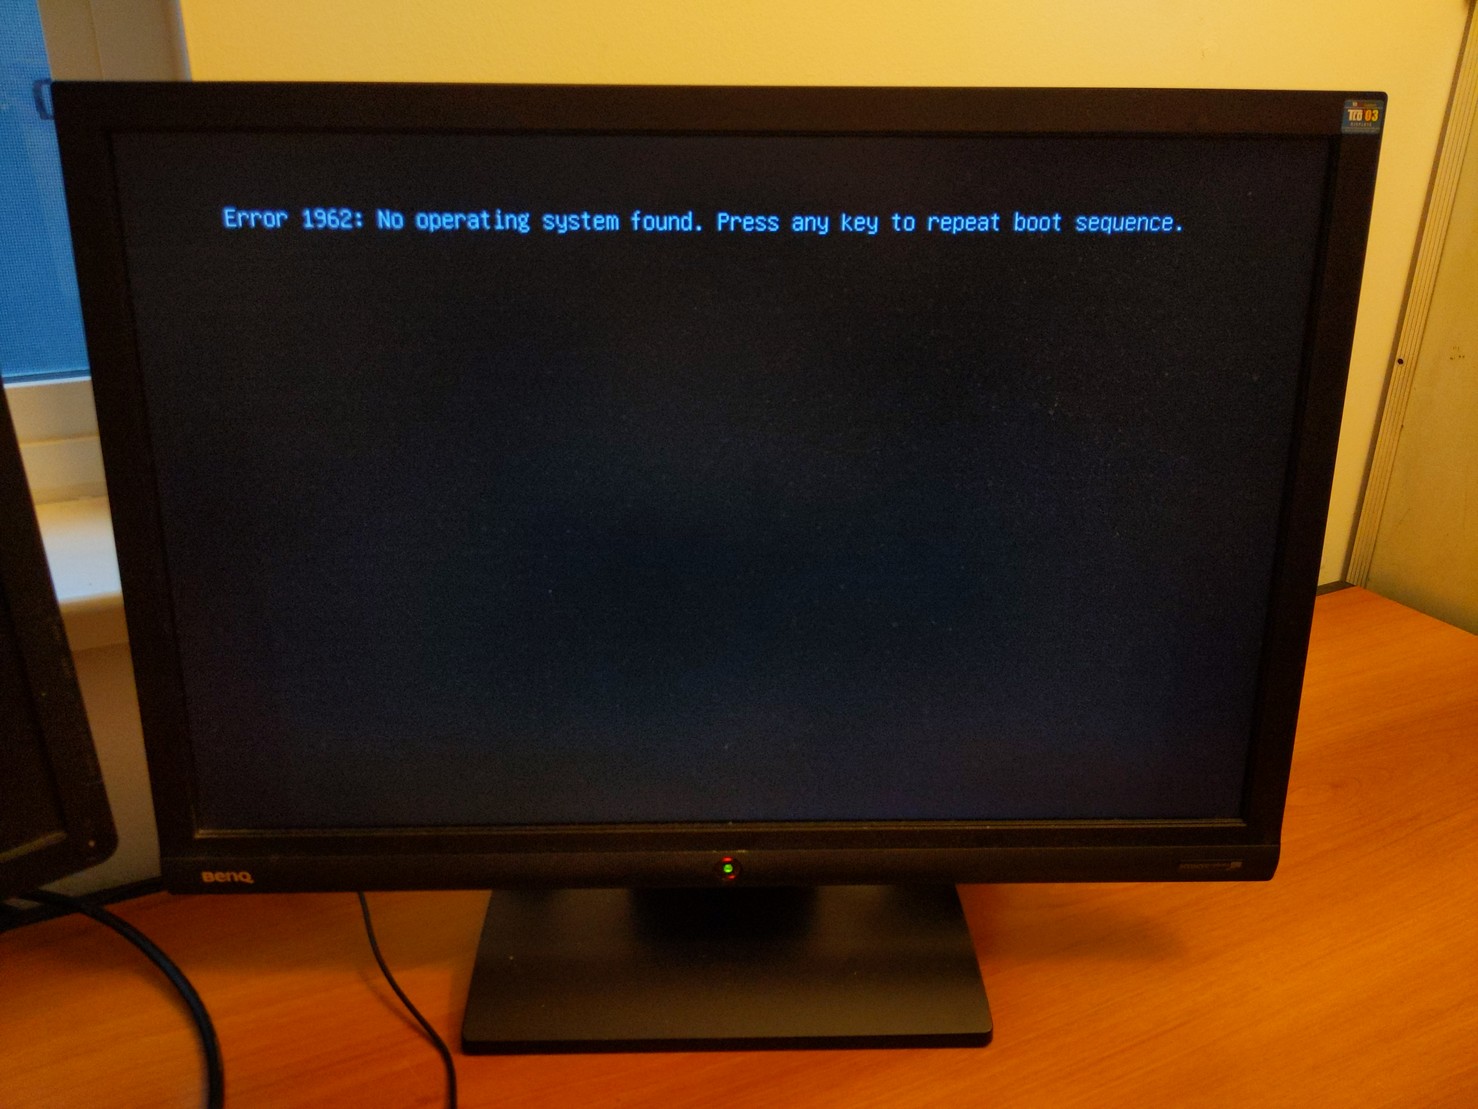 Error 1962: No operating system found. Press any key to repeat boot sequence.